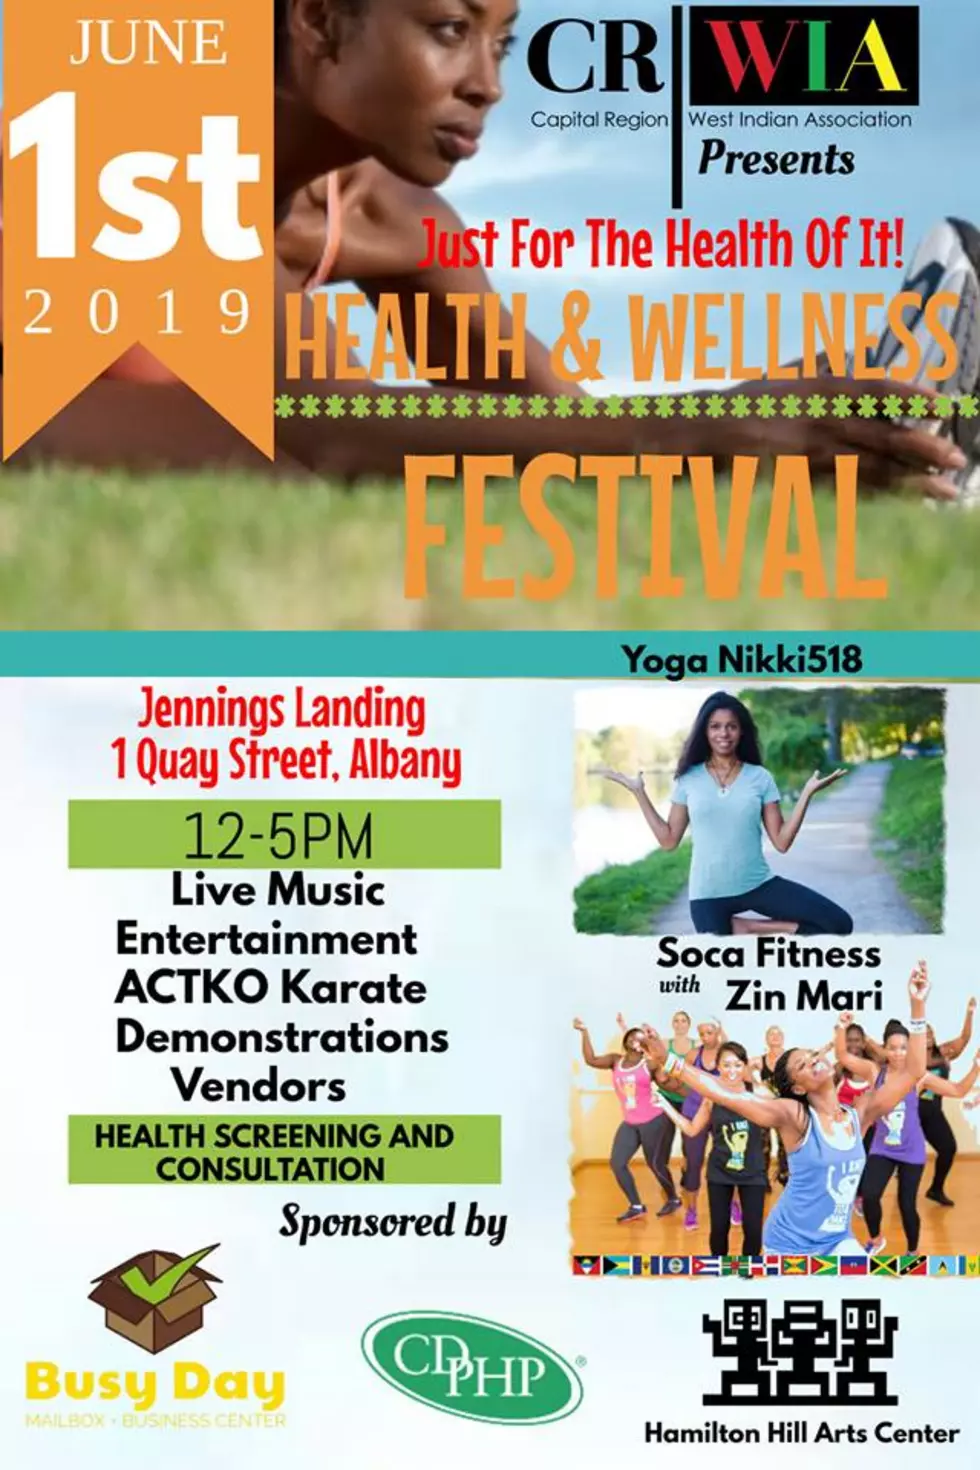 Just For The Health Of It Wellness Festival